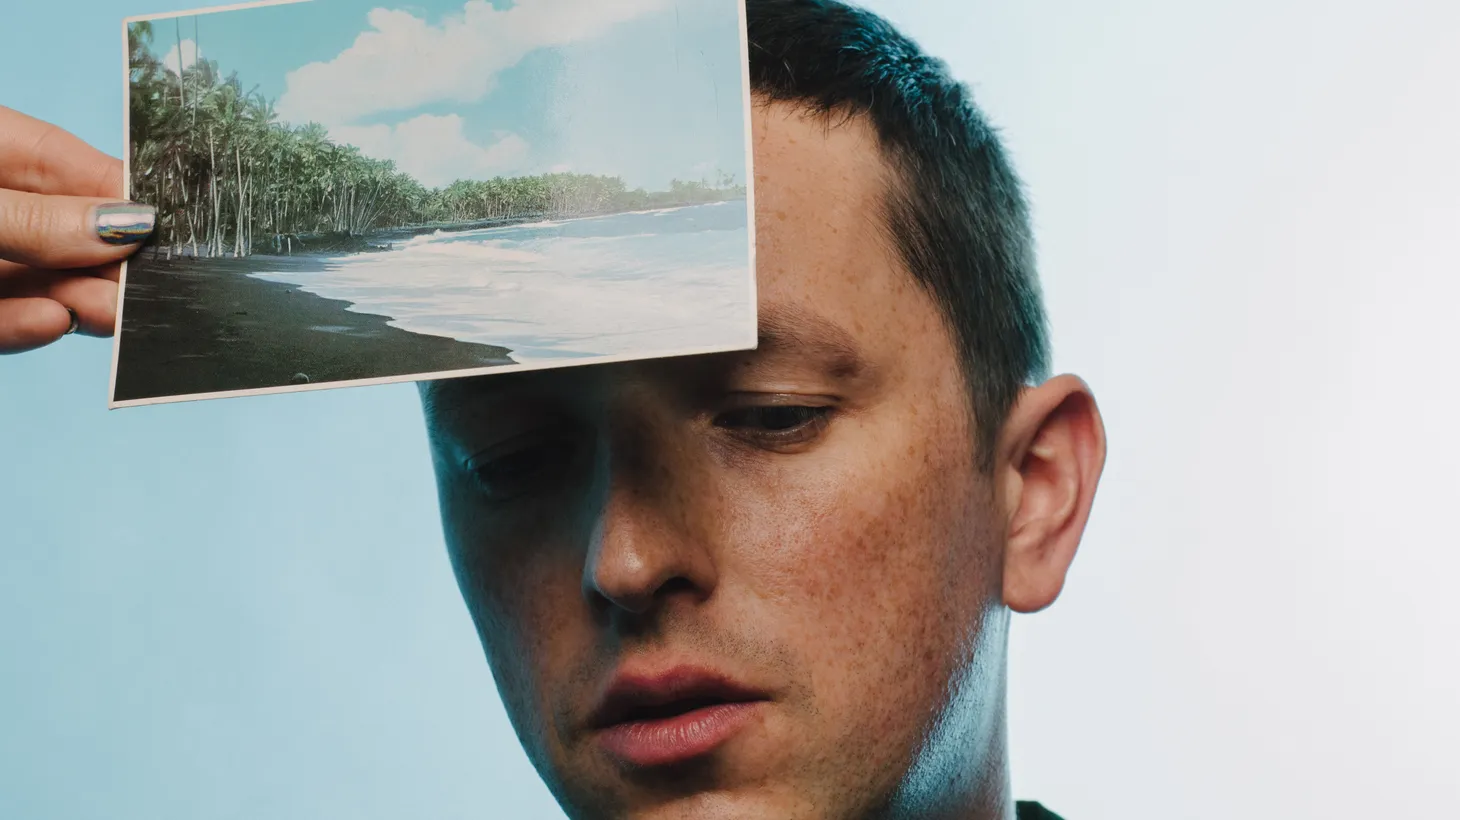 Come Sept. 9, Totally Enormous Extinct Dinosaurs fans will be able to get their hands and ears on the British electronic producer’s hotly-anticipated new album “When the Lights Go.”